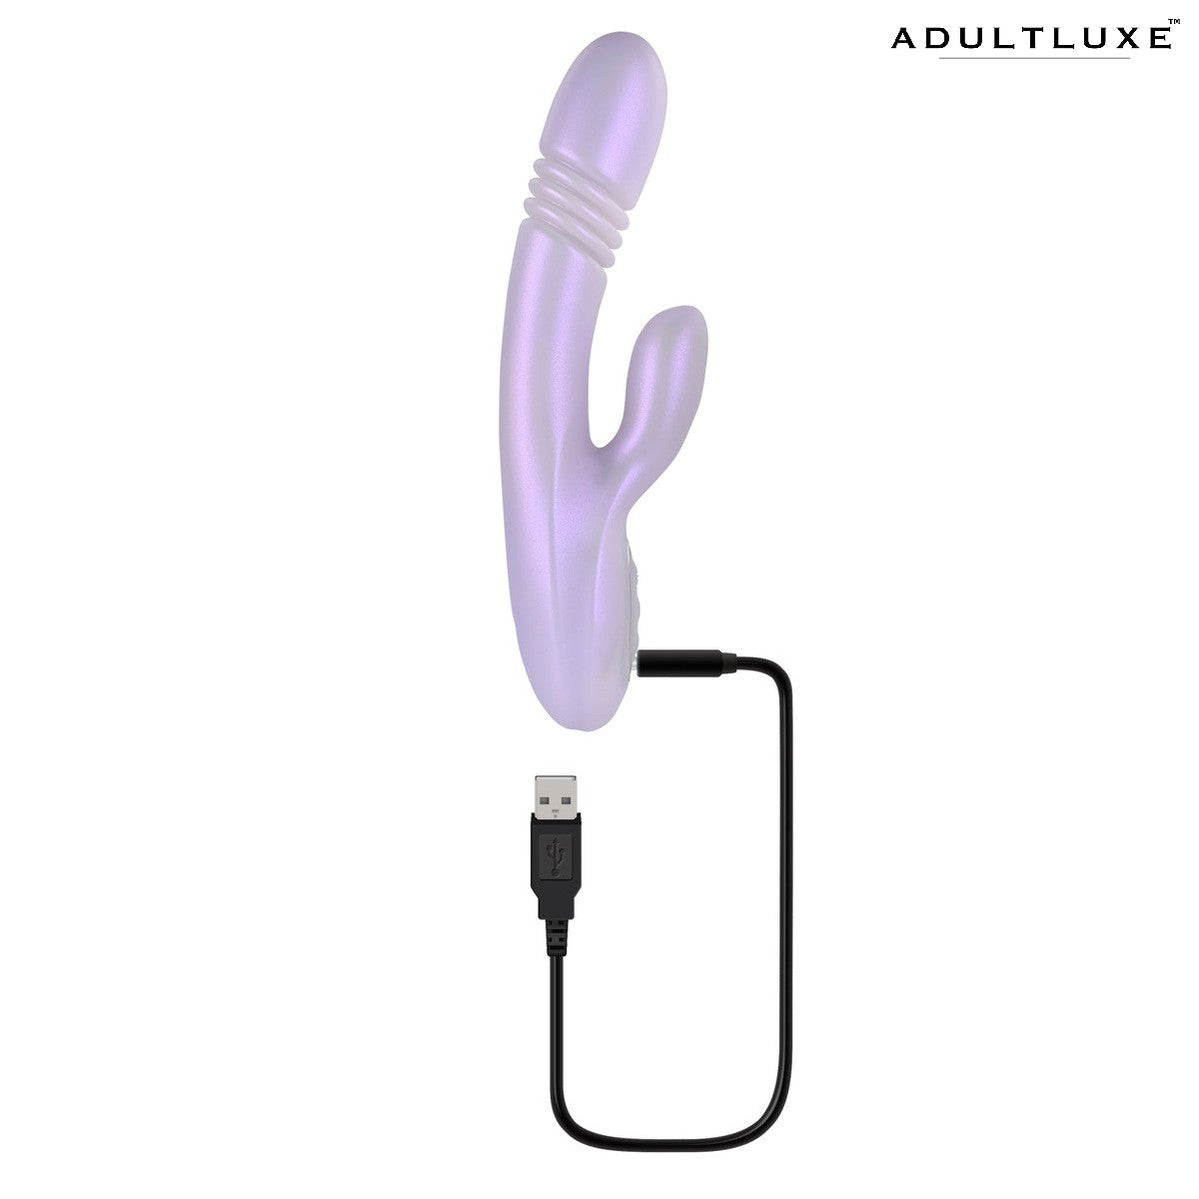 Playboy Bumping Bunny G-Spot Vibrator with Warming Function